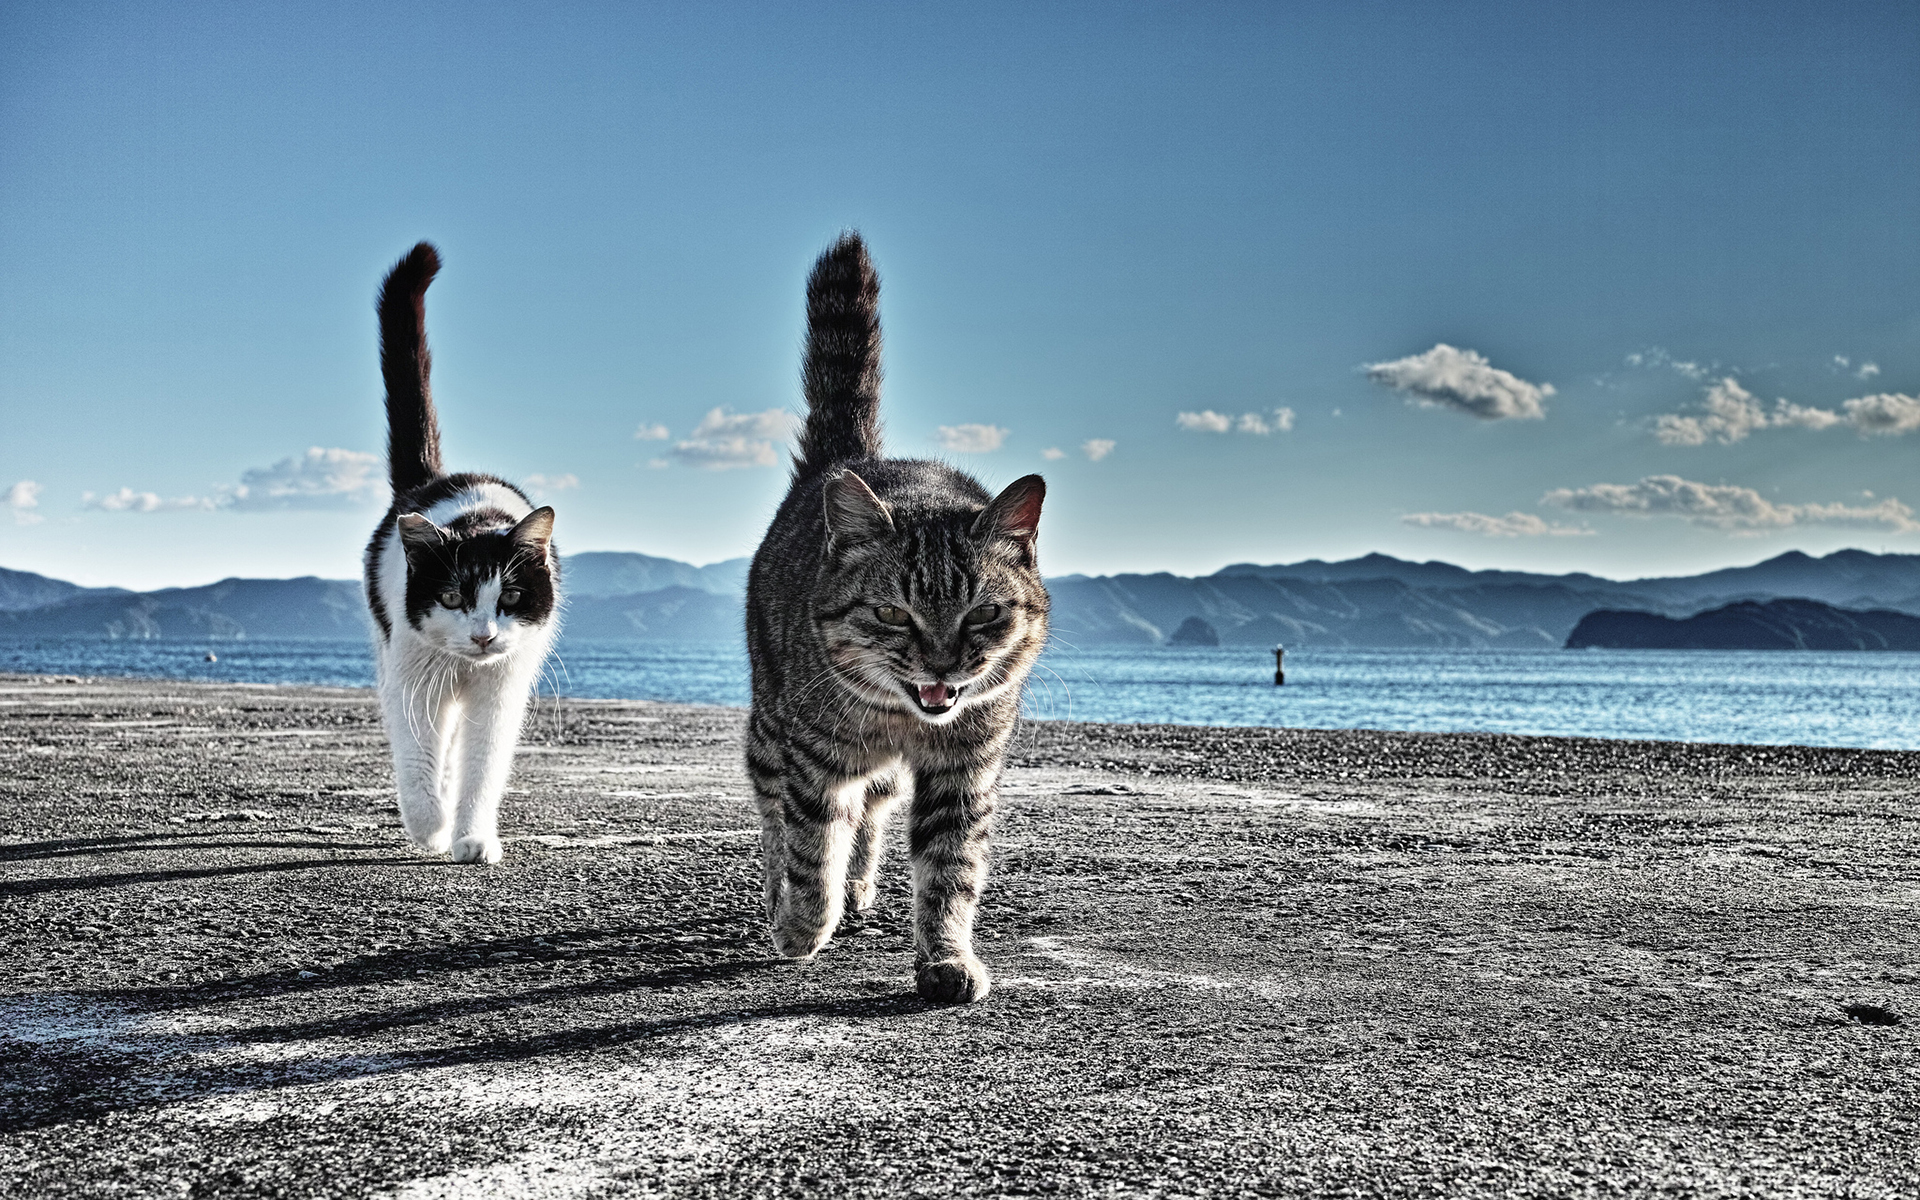 animals, Cats, Felines, Fur, Whiskers, Beaches, Water, Sound, Bay, Mountains, Sky, Clouds Wallpaper